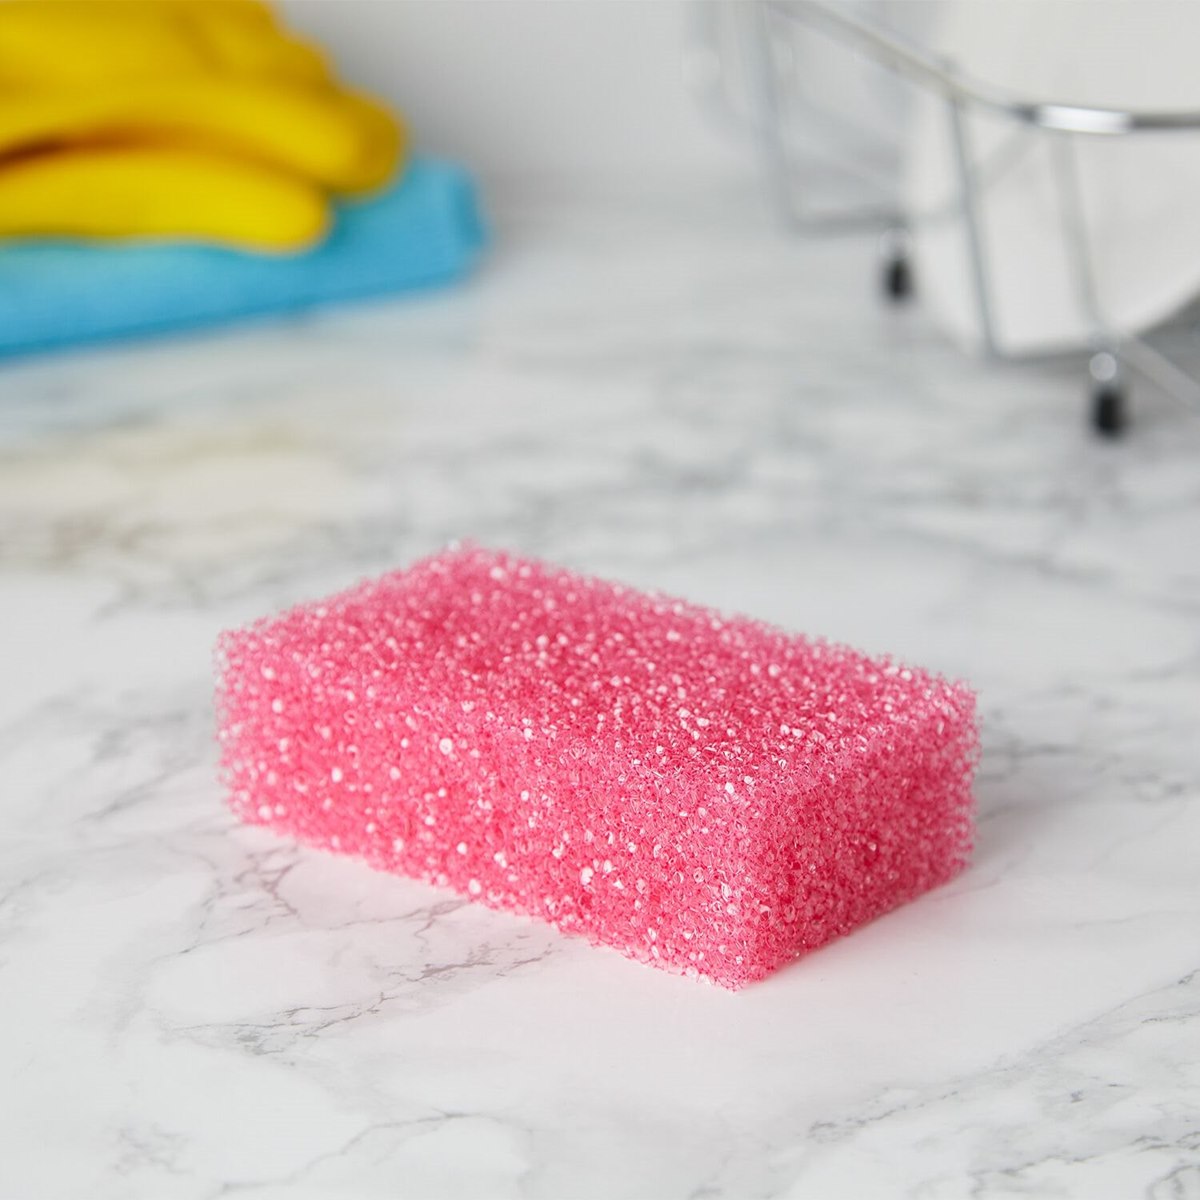 Stain-removing-sponges